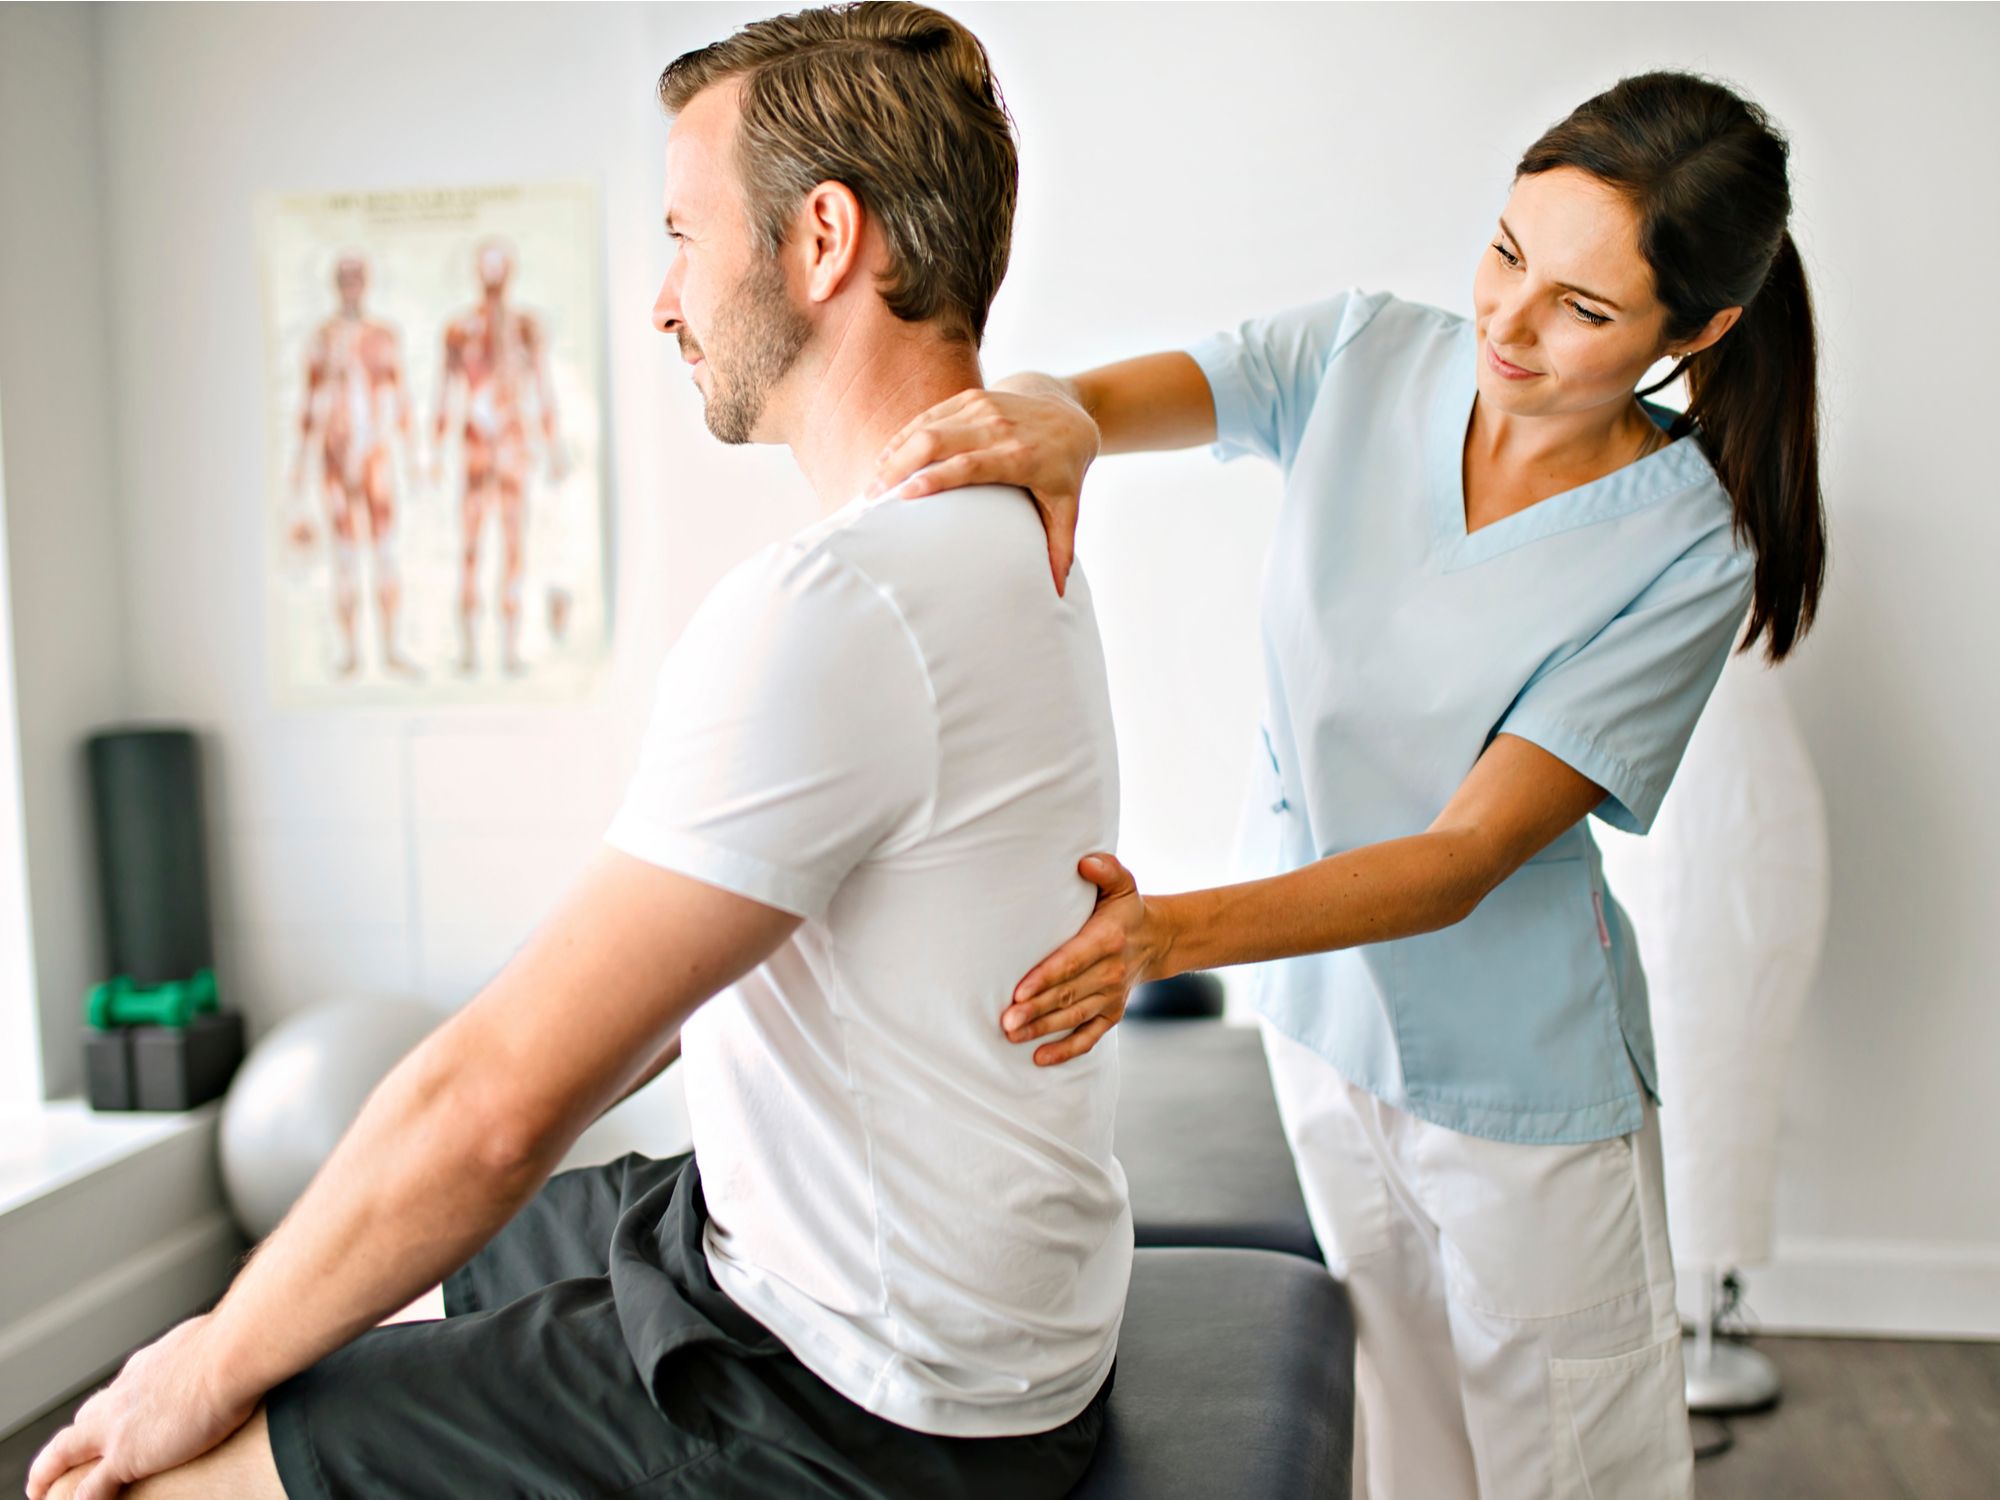 How Does Spinal Decompression Help With Herniated Disks?